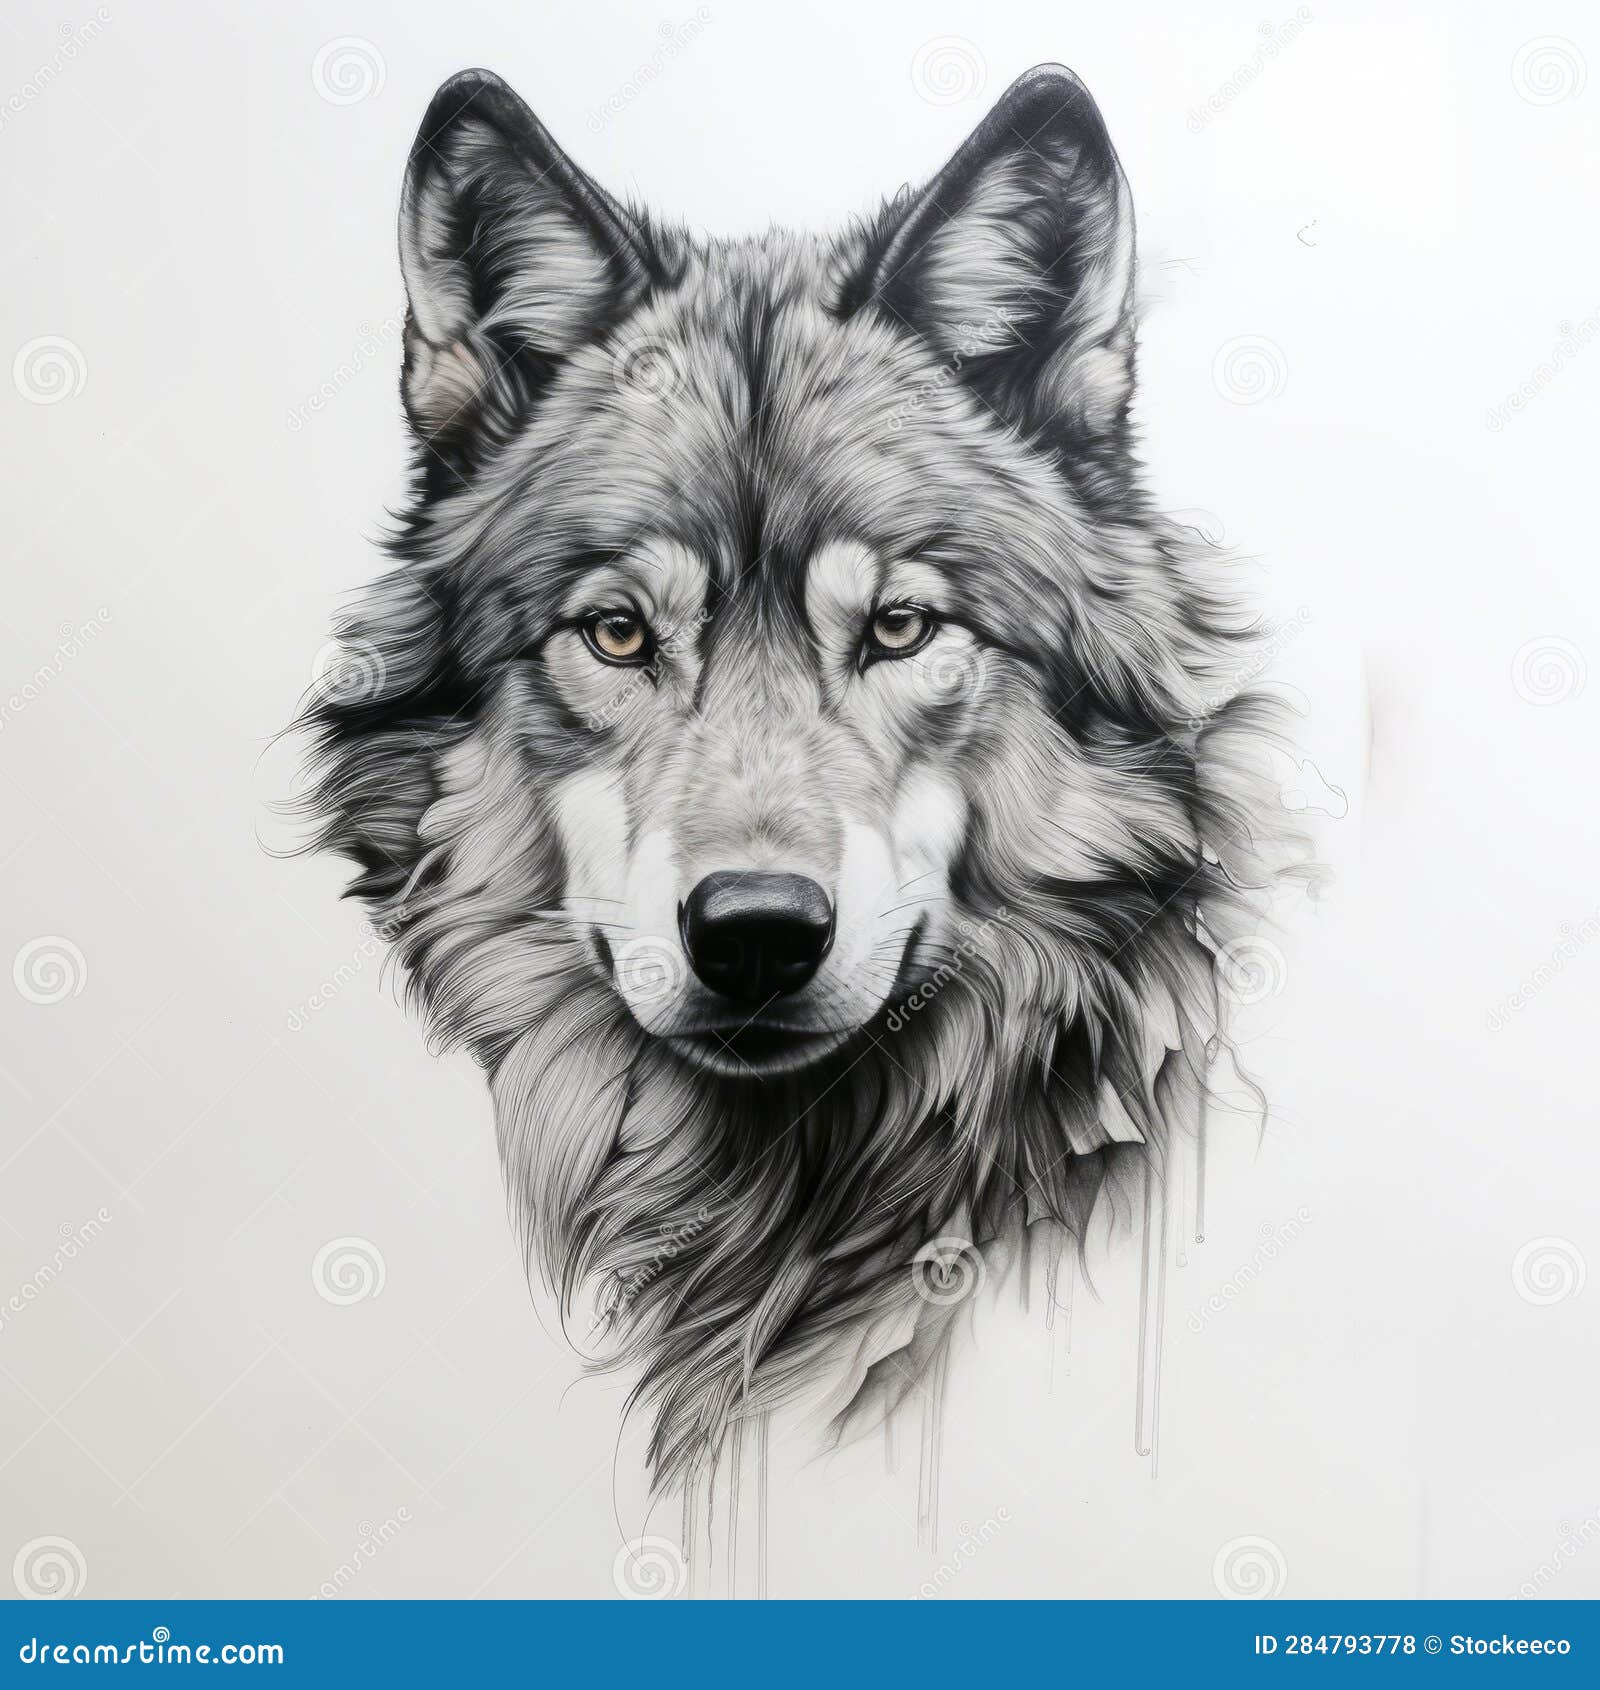 Drawing wolf portrait Stock Photos, Royalty Free Drawing wolf portrait  Images | Depositphotos